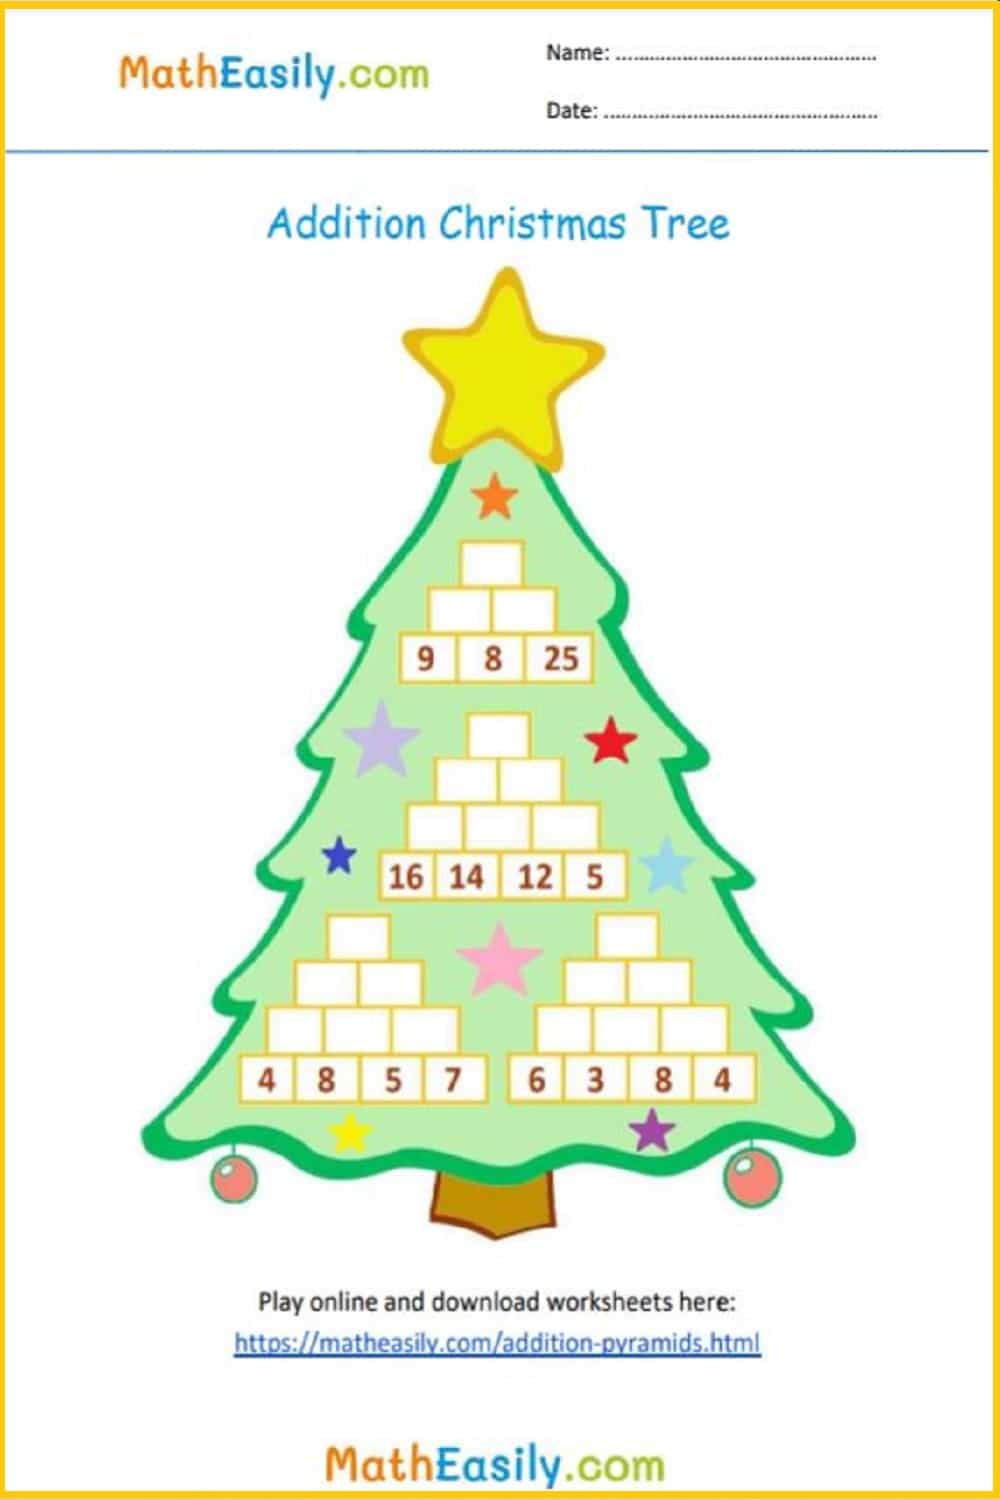 christmas math worksheets for 1st grade. Free Christmas Math Worksheets PDF.
christmas math sheets. Free christmas addition worksheets. Printable math christmas worksheets free. Math christmas worksheets PDF.
2nd grade christmas worksheets. free christmas worksheets printables.